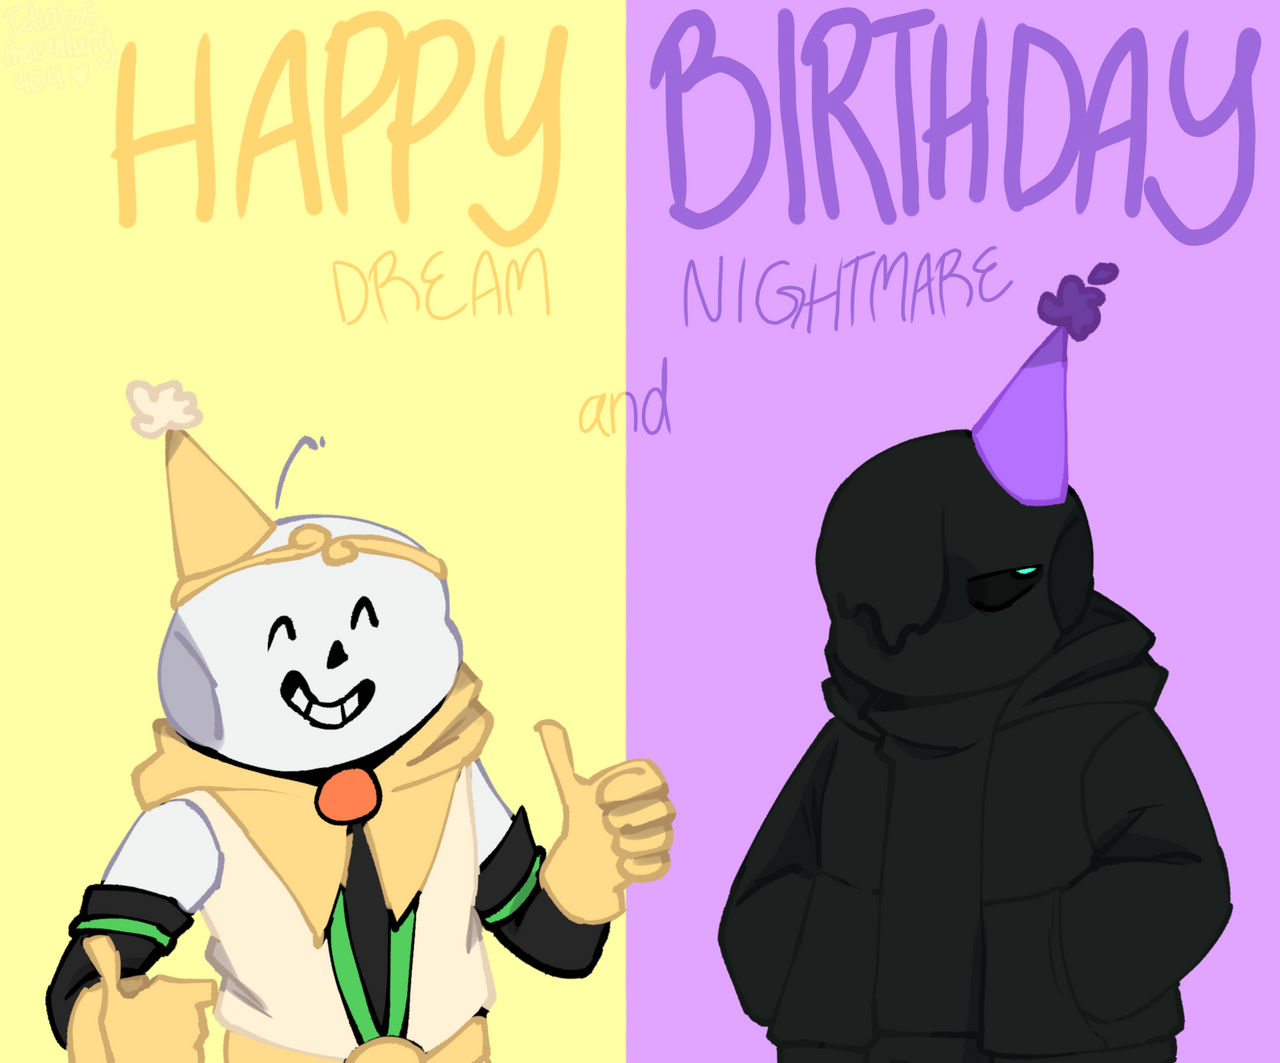 Our Birthday! [Dream and Nightmare] - ♡𝓔𝓻𝓻𝓸𝓻'𝓼 𝔀𝓲𝓯𝓮